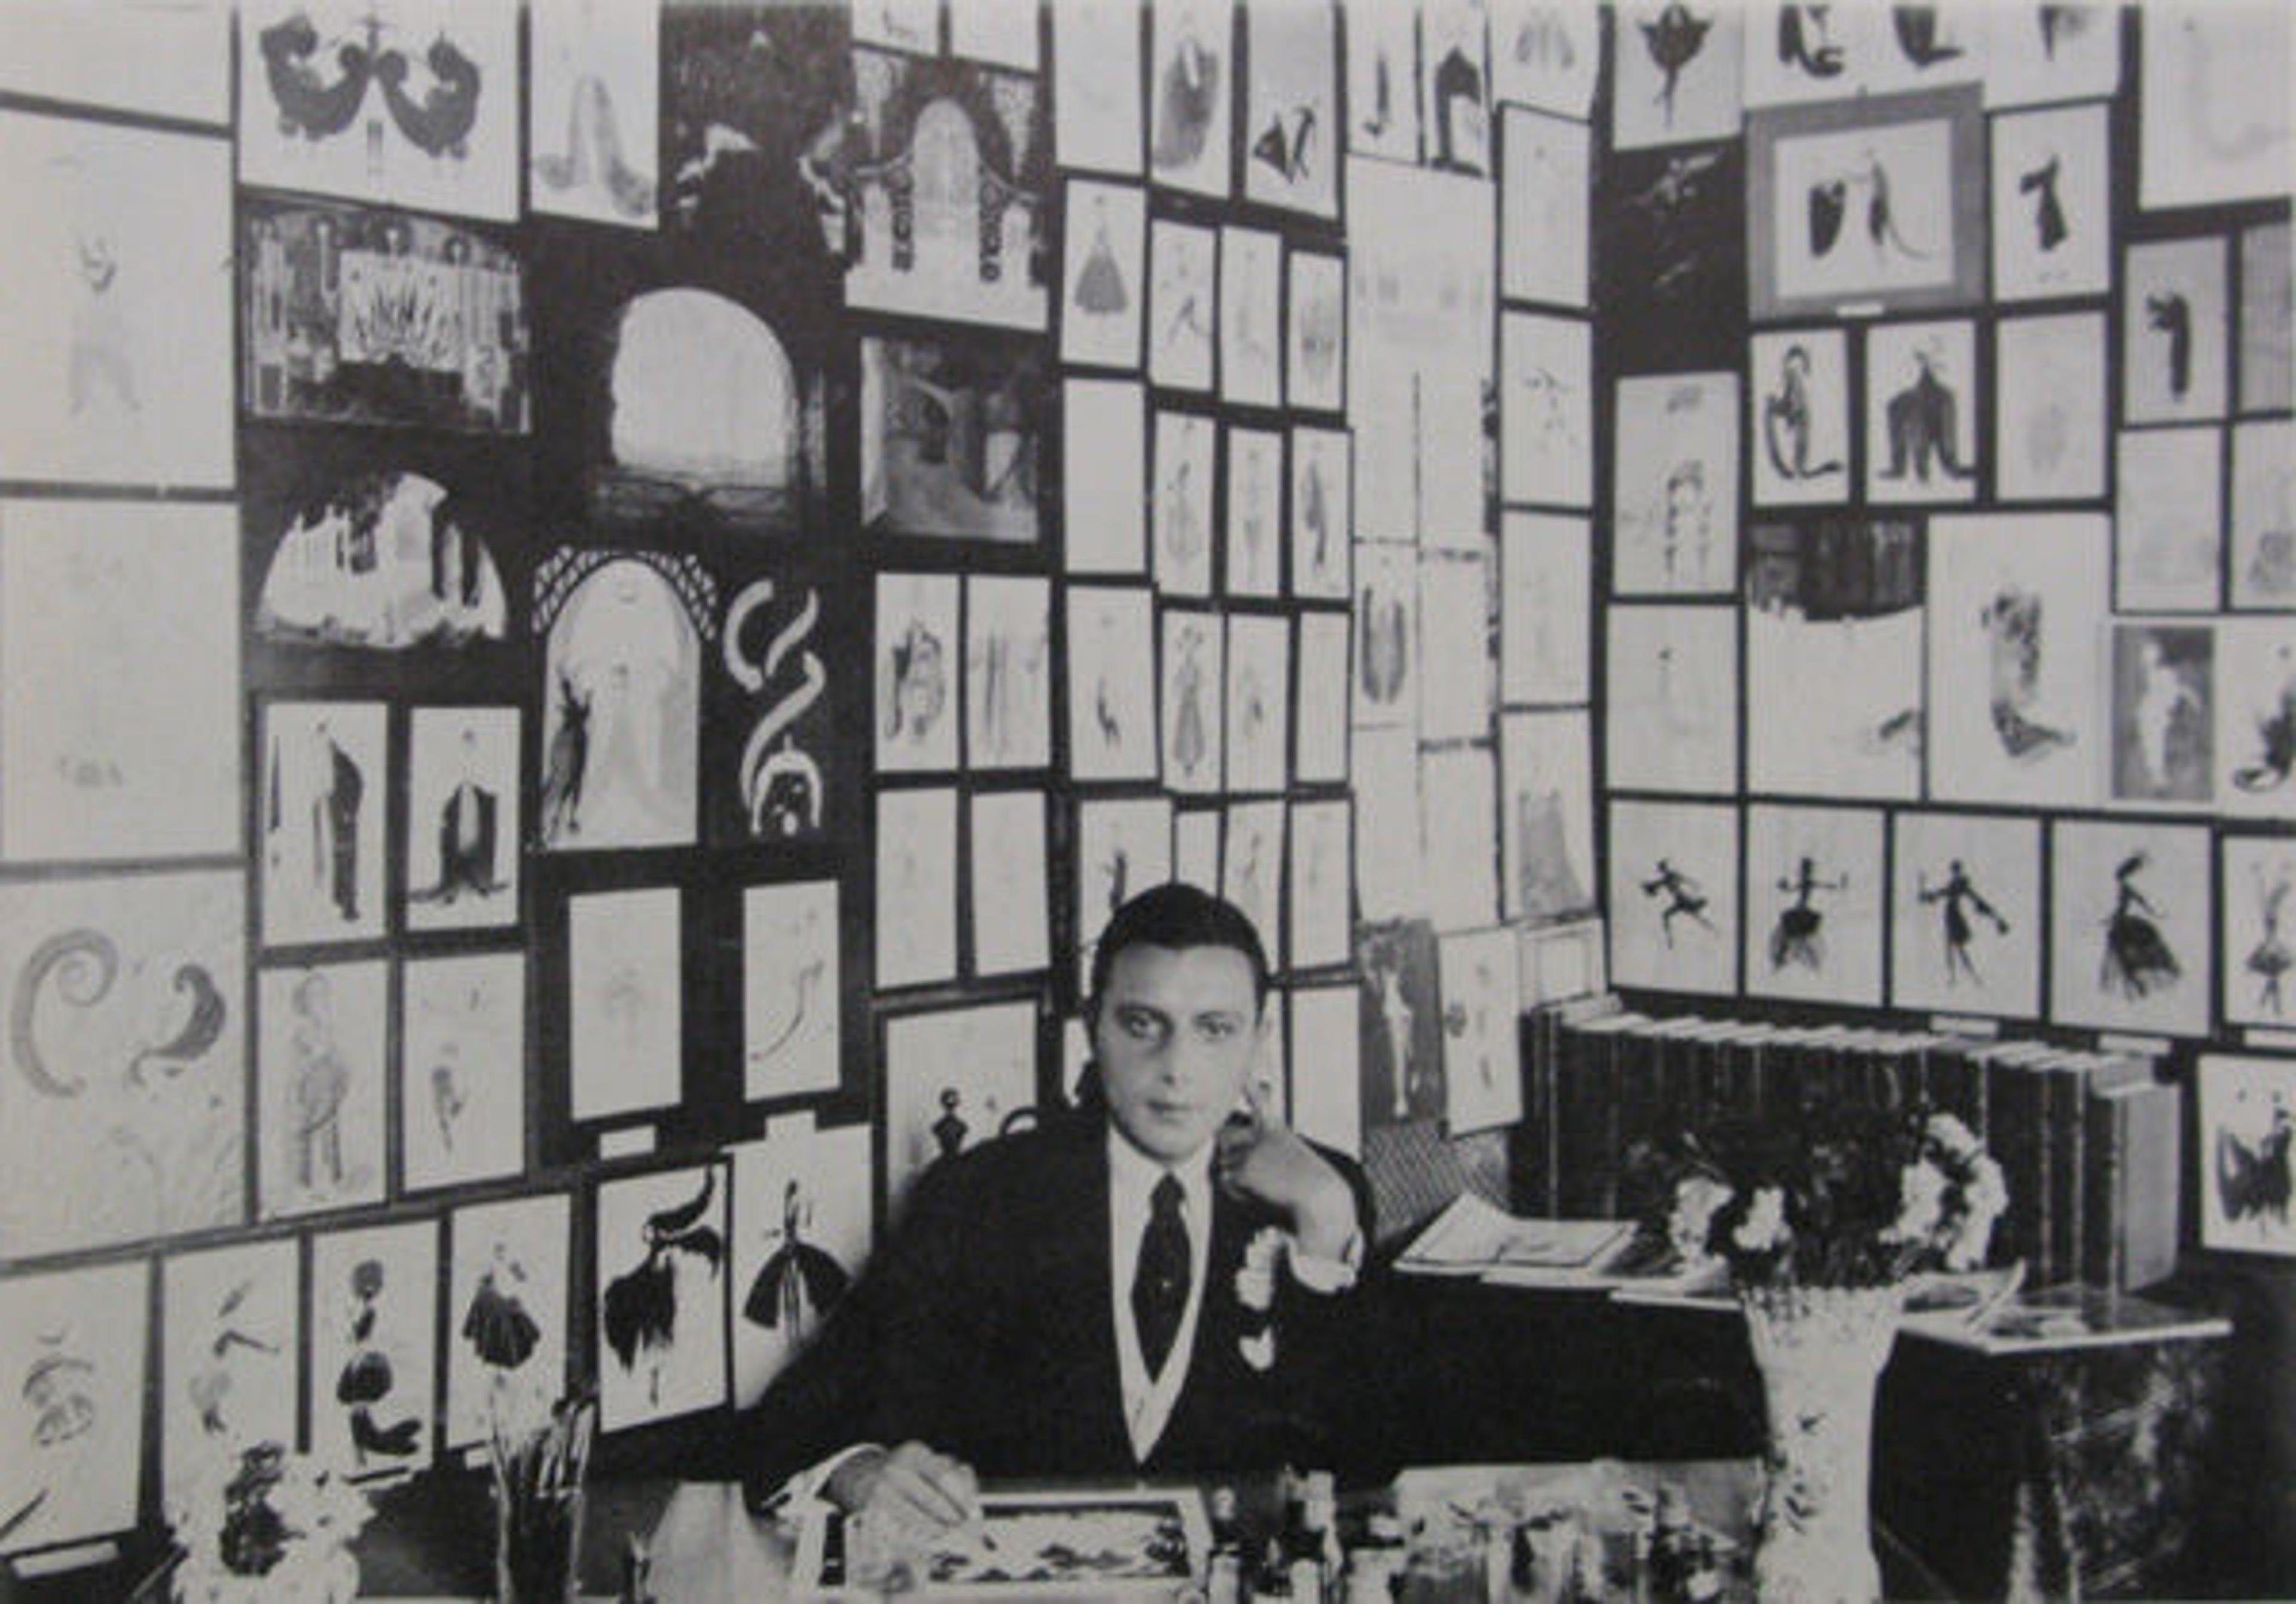 Fig. 5. Erté in his studio in Monte Carlo, the walls of which were covered in his drawings, 1917. Reproduction of a black and white photograph used in the pamphlet for his exhibition at the Grosvenor Gallery, New York, held June 7–July 1, 1967 